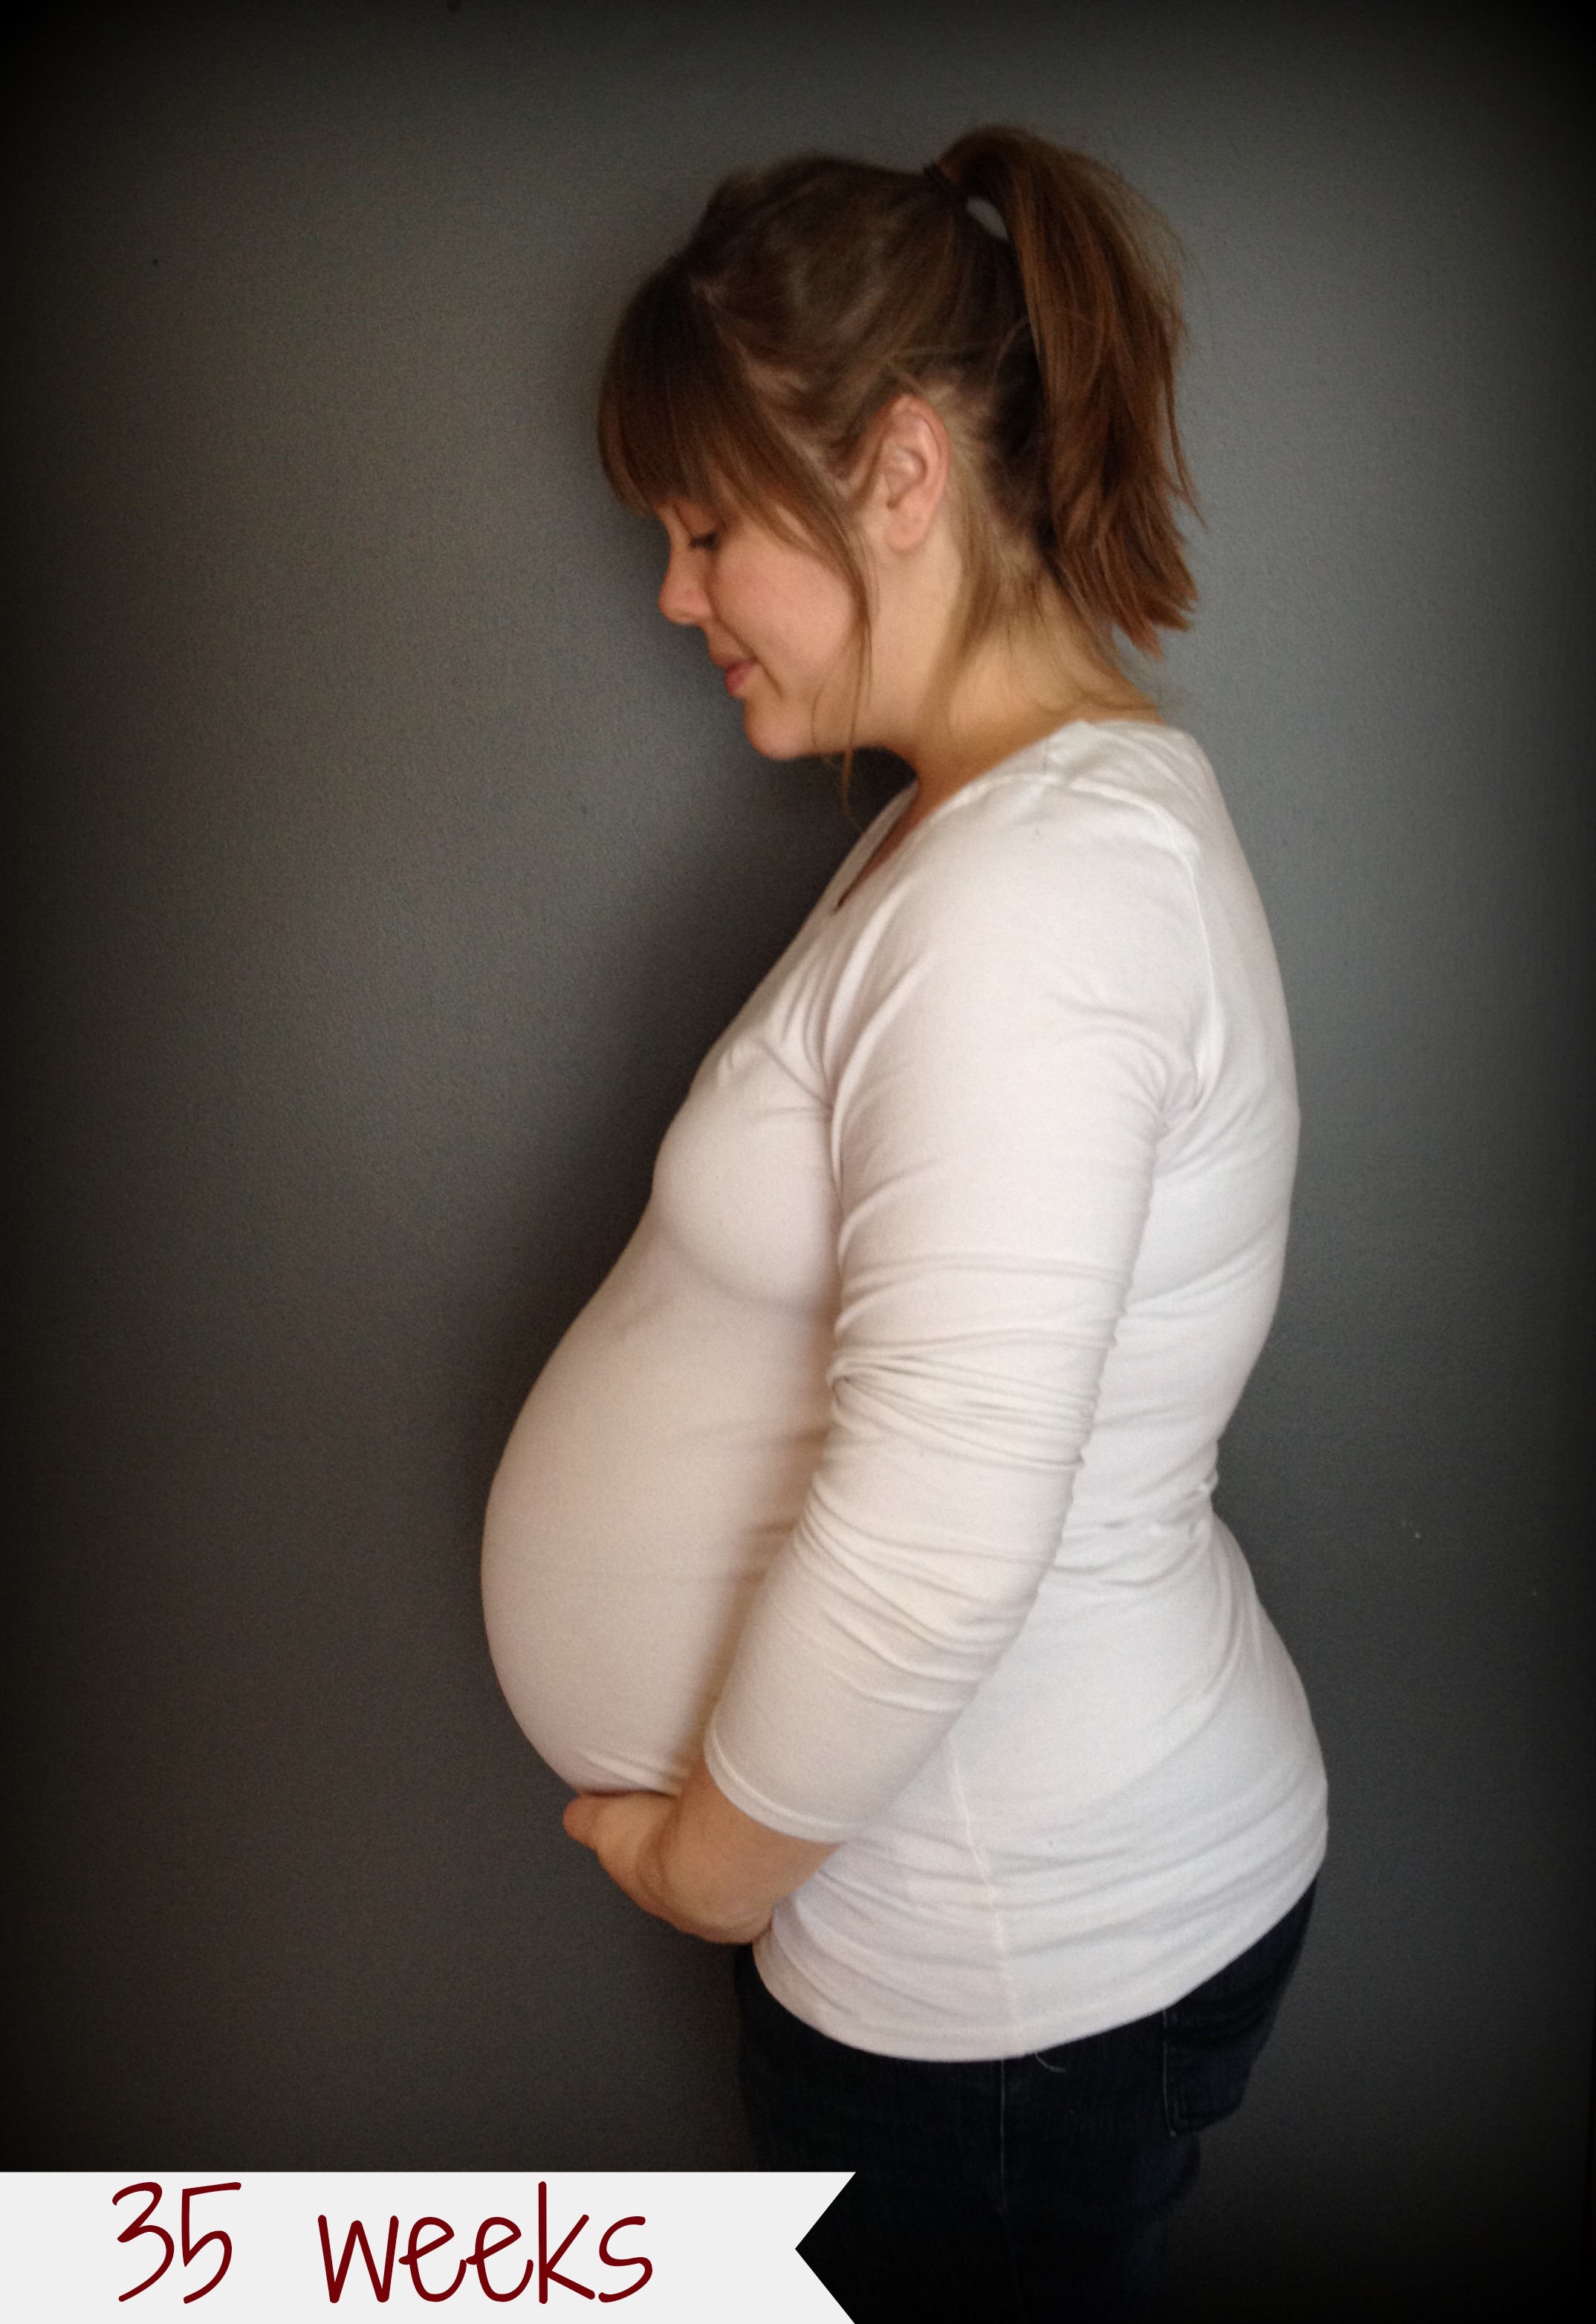 on 35 weeks: a #girlwithbaby update